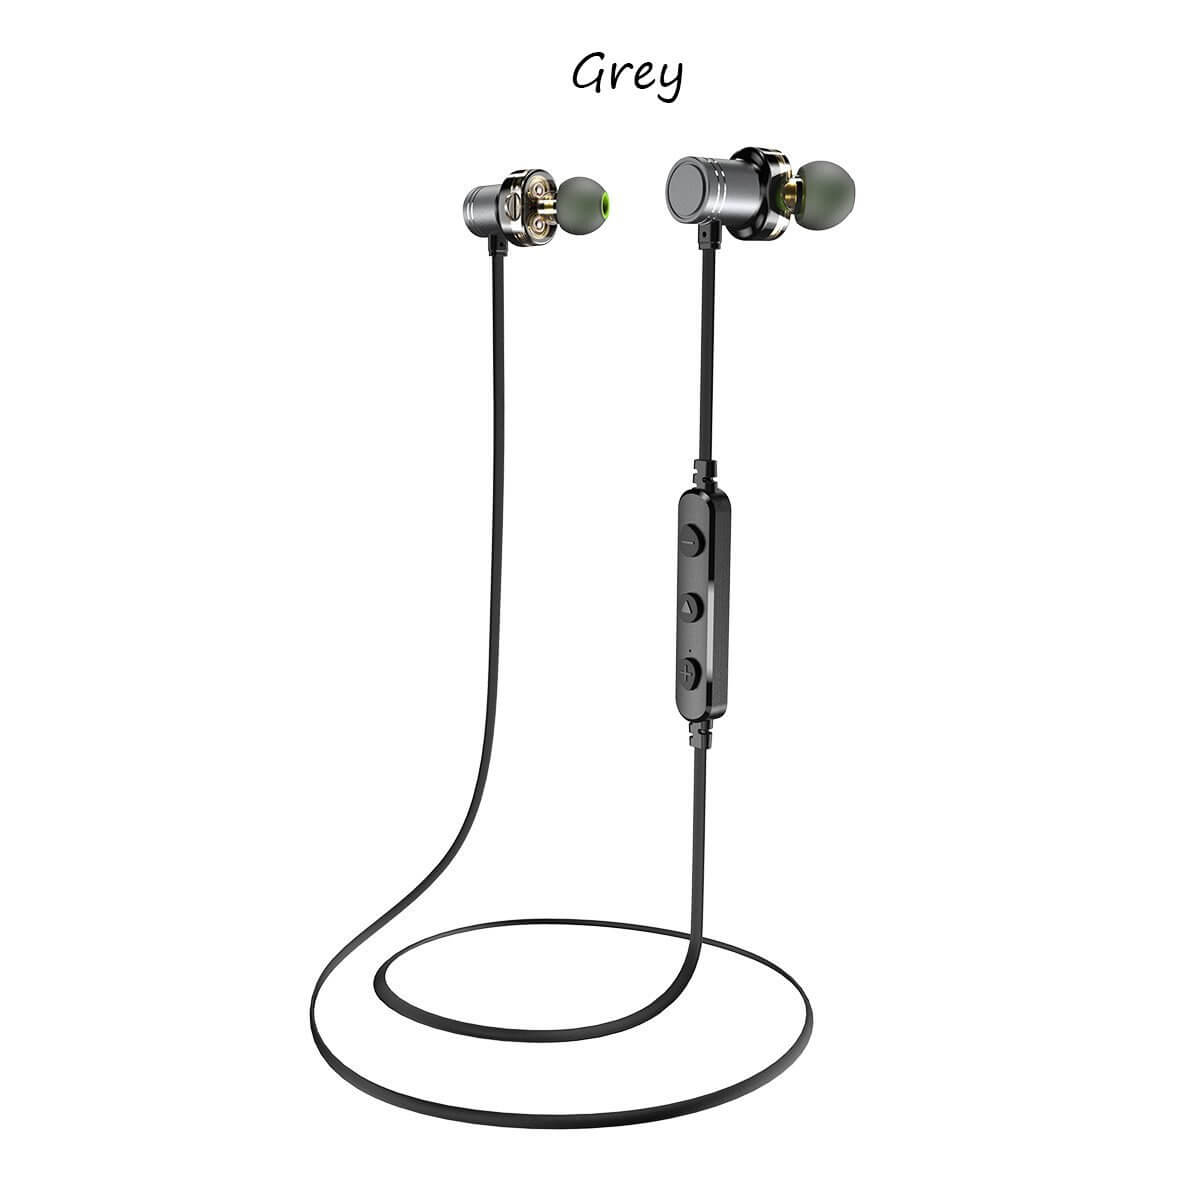 Dual Driver 4 Cavity Magnetic Bluetooth Earphones That Dont Let A Little Bit Of The World In